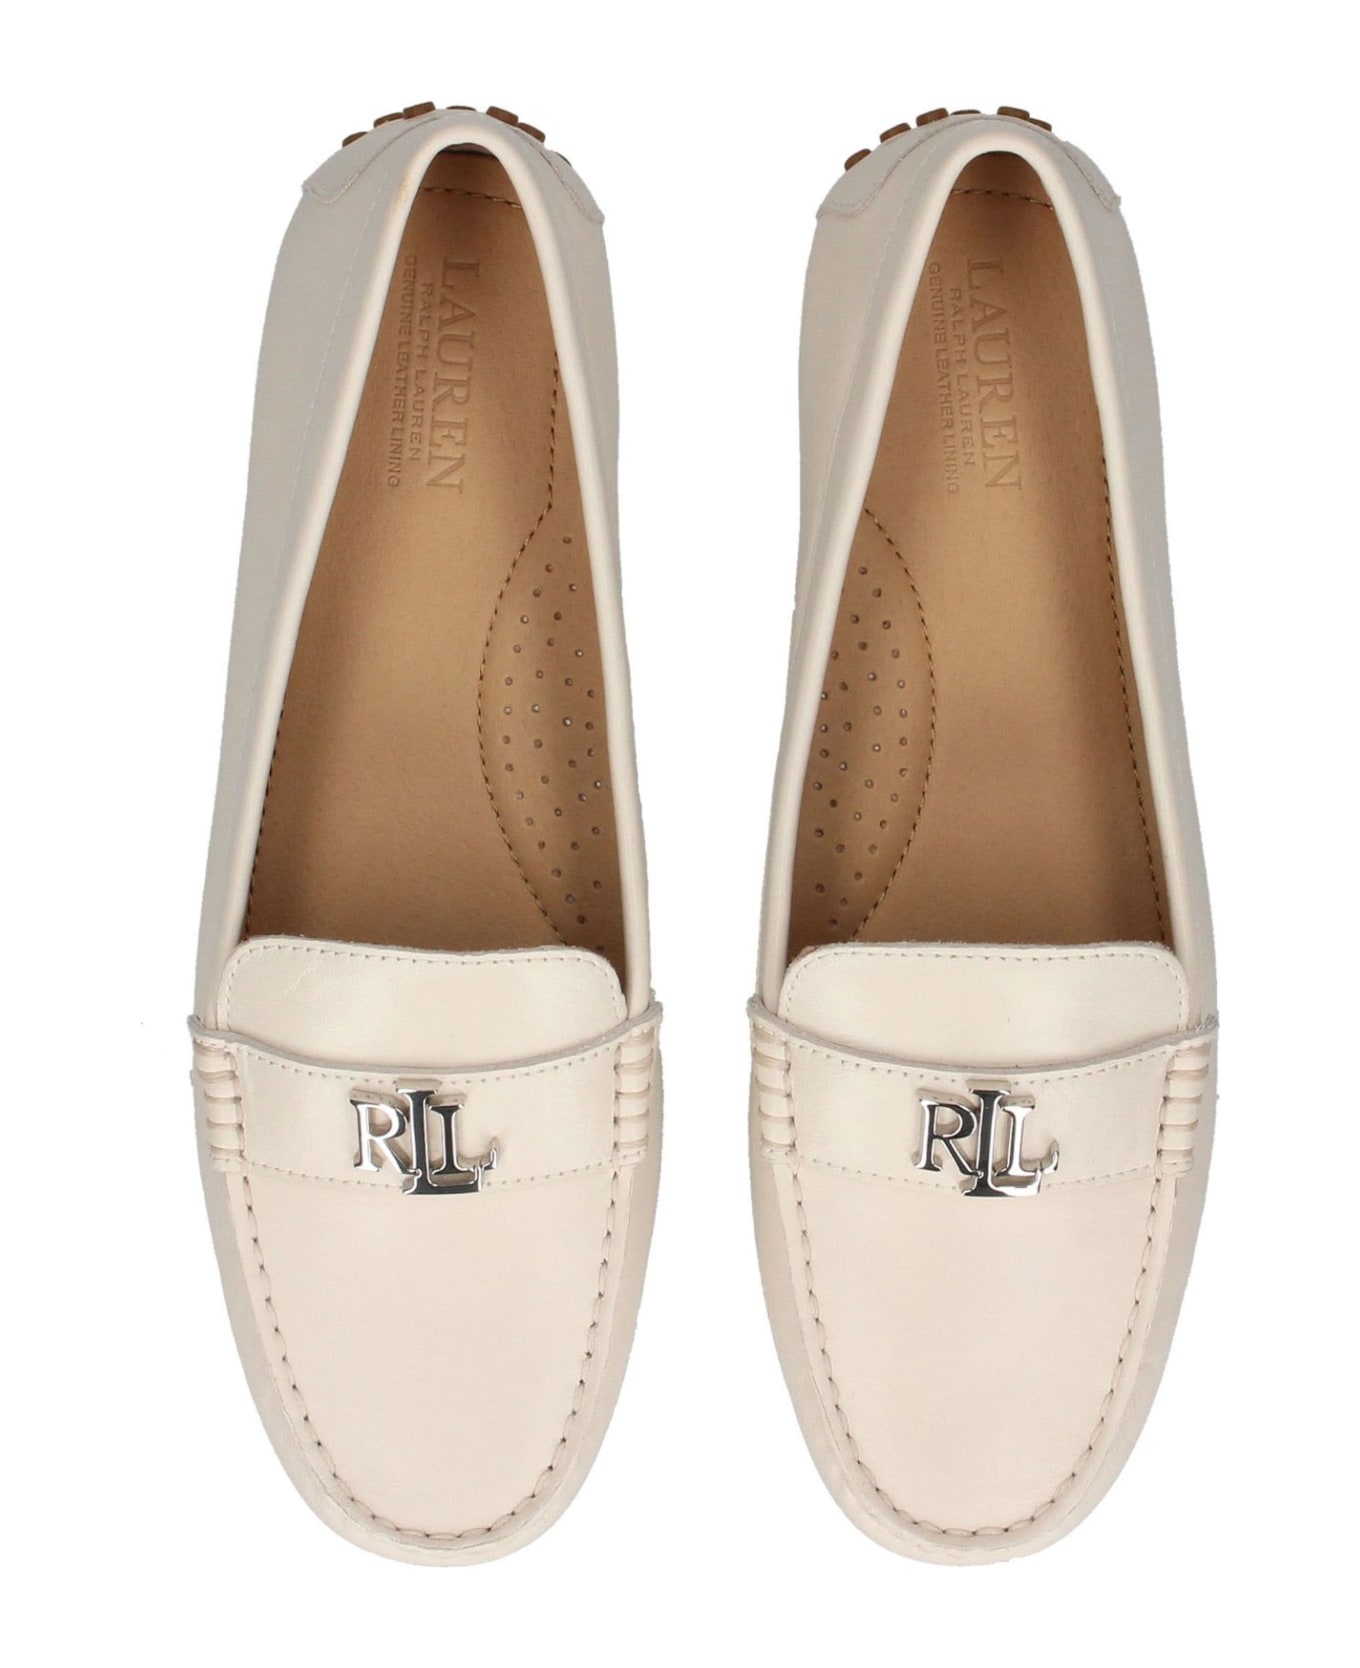 Ralph Lauren Moccasin In Soft White Leather - SOFT WHITE